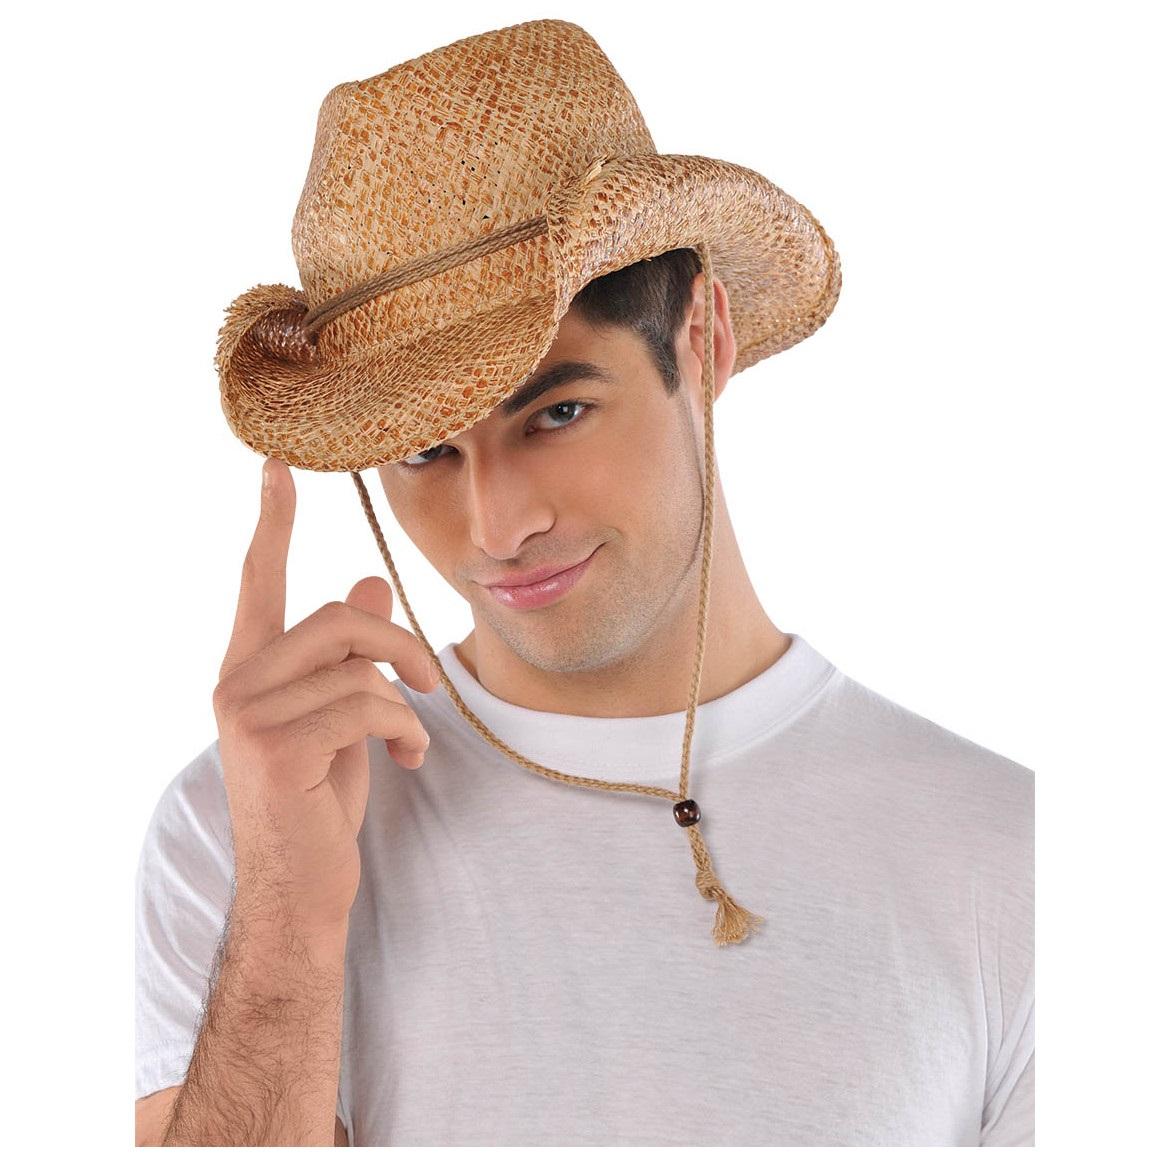 Cowboy Straw Hat Costumes & Apparel - Party Centre